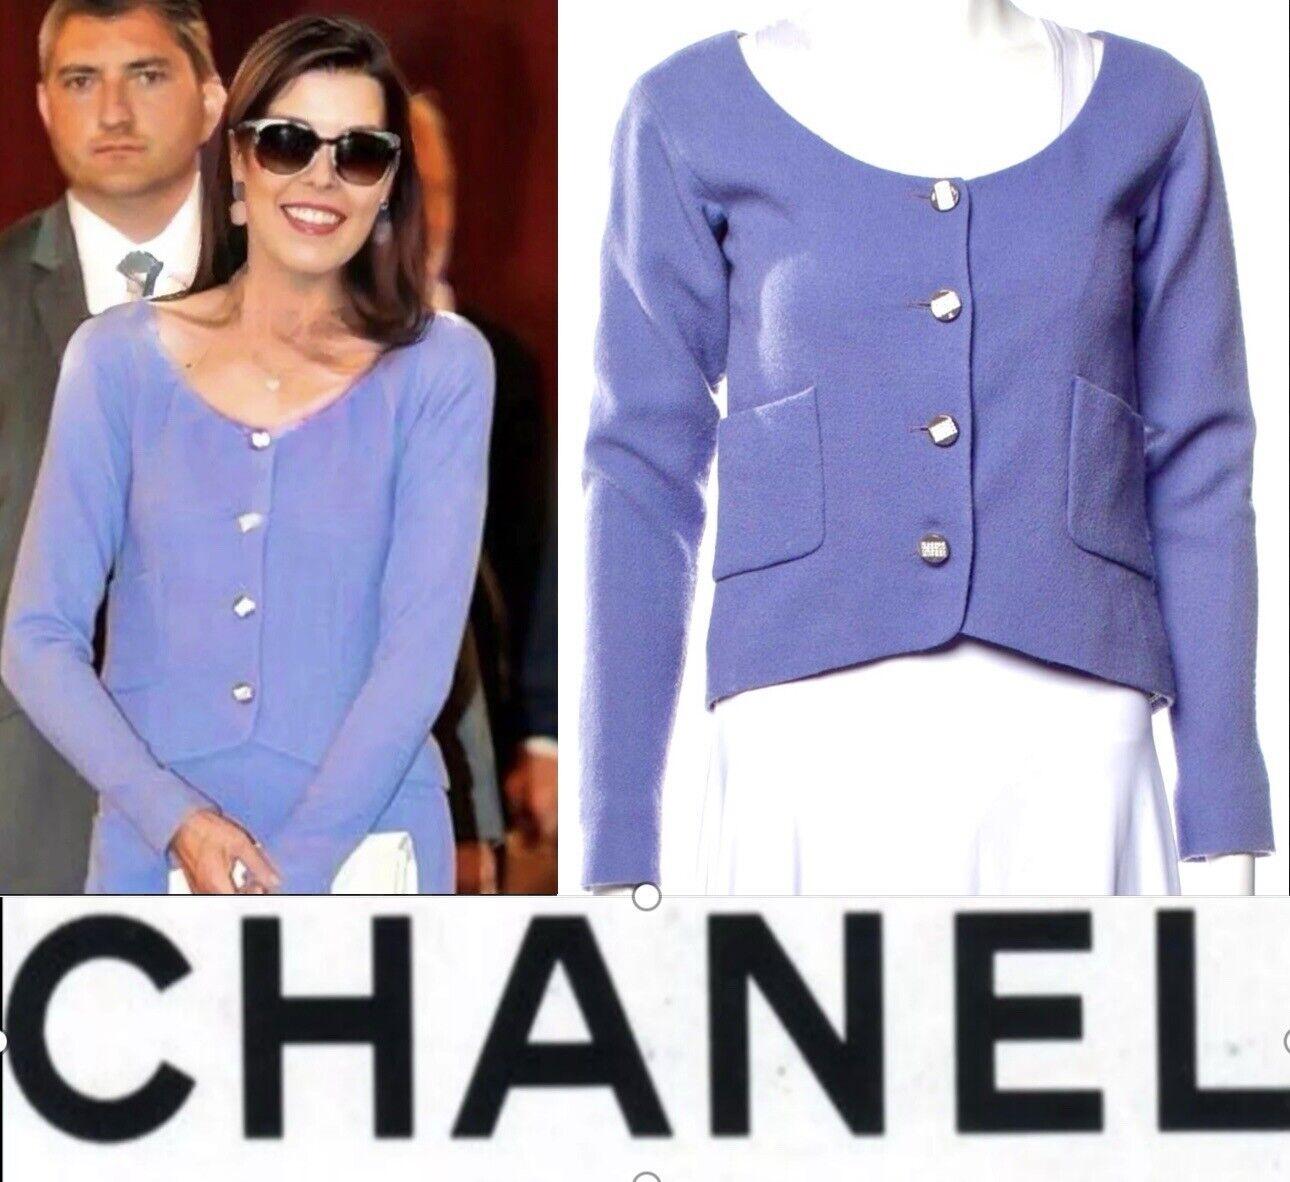 Elegant Chanel lavender tweed jacket from Runway of FRENCH RIVIERA Cruise Collection.
- CC logo jewel Gripoix buttons
- tonal silk lining with camellias
Size mark 38 FR. Condition is pristine.